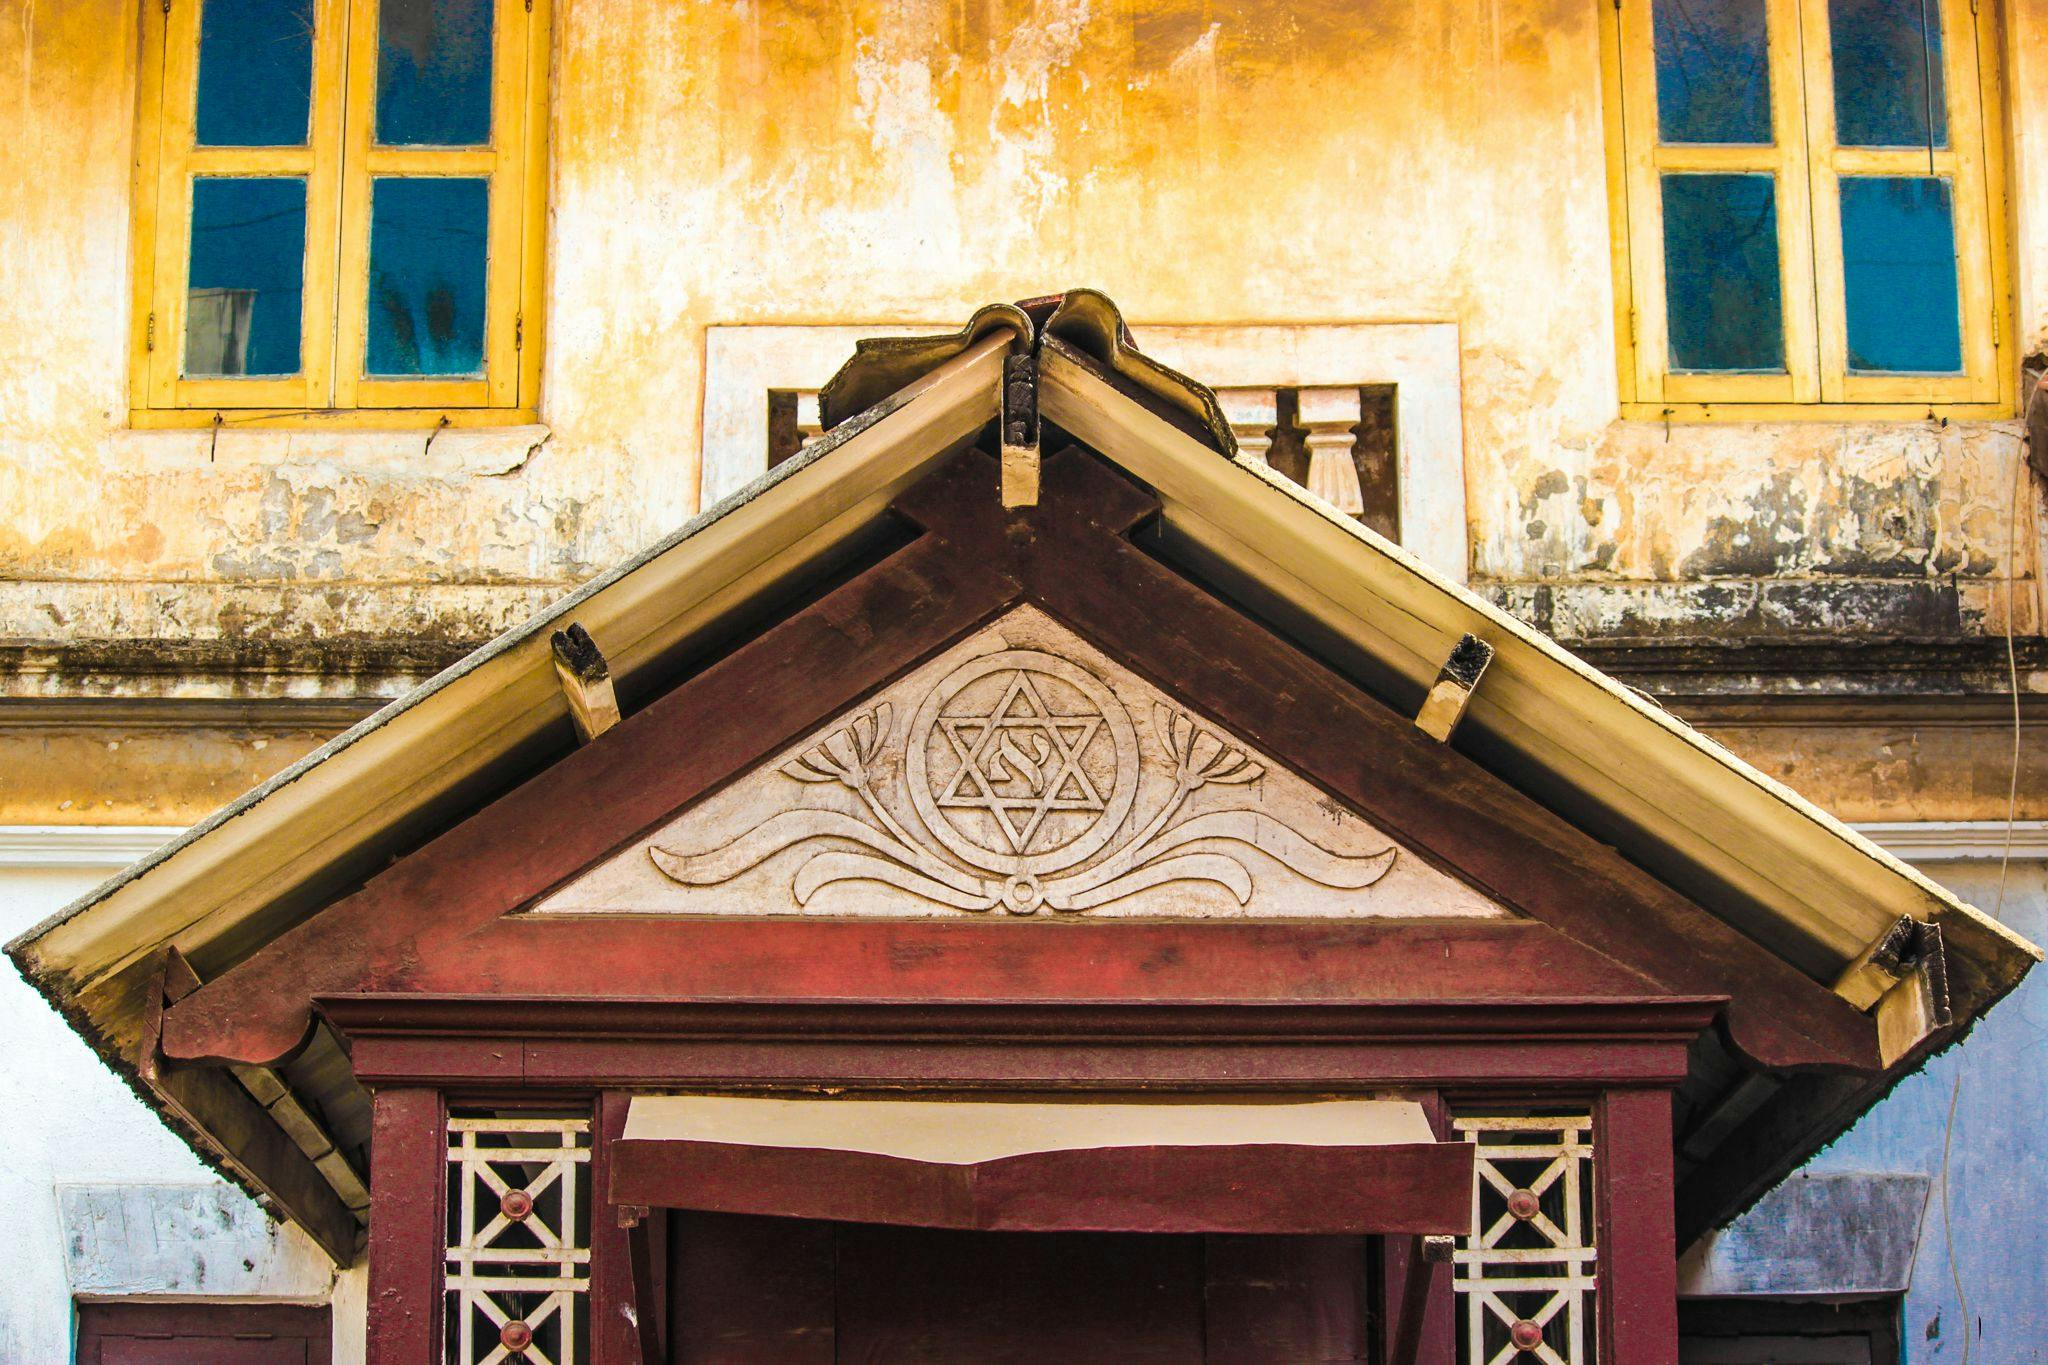 The ‘Star of David’ marks the old Jewish quarters of Alibaug